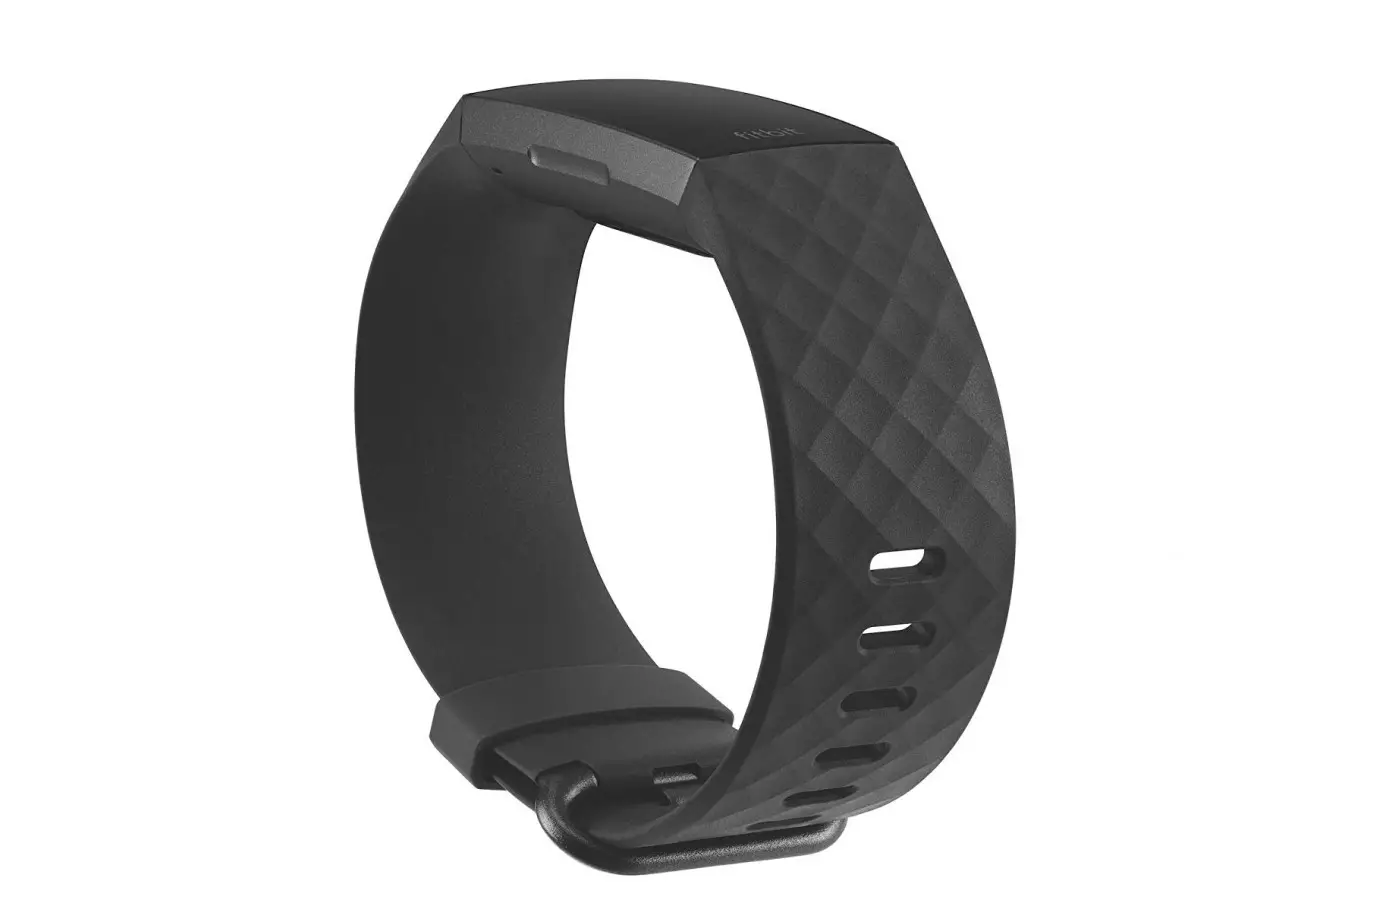 The Fitbit Charge 3 fits between a small and a large wrist for easy customization and a comfortable fit.